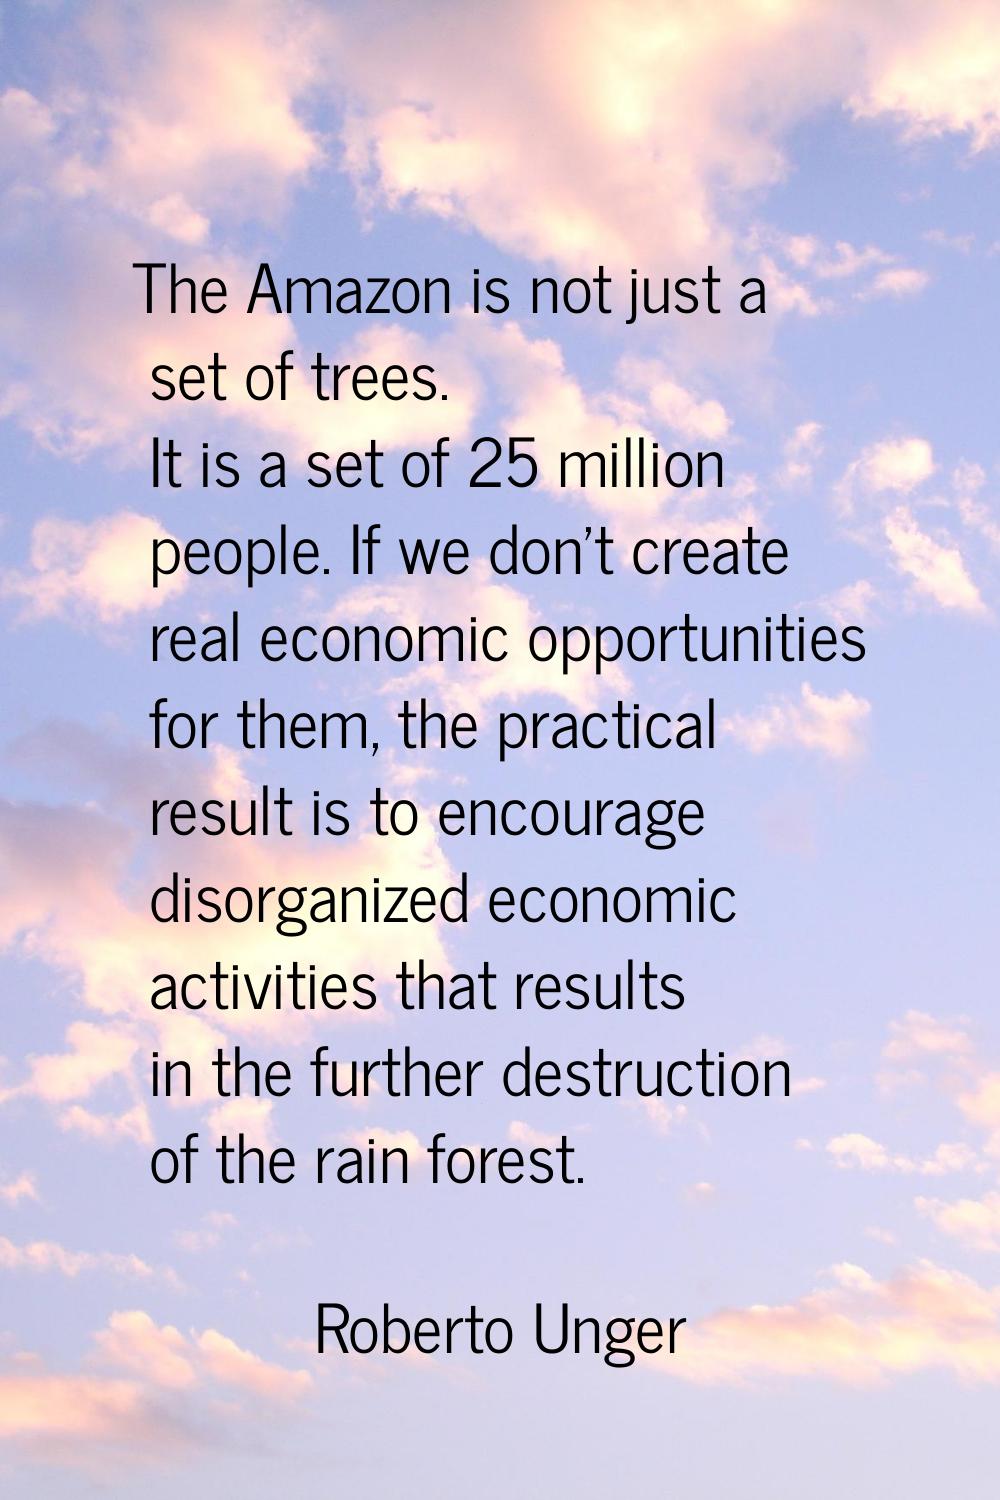 The Amazon is not just a set of trees. It is a set of 25 million people. If we don't create real ec